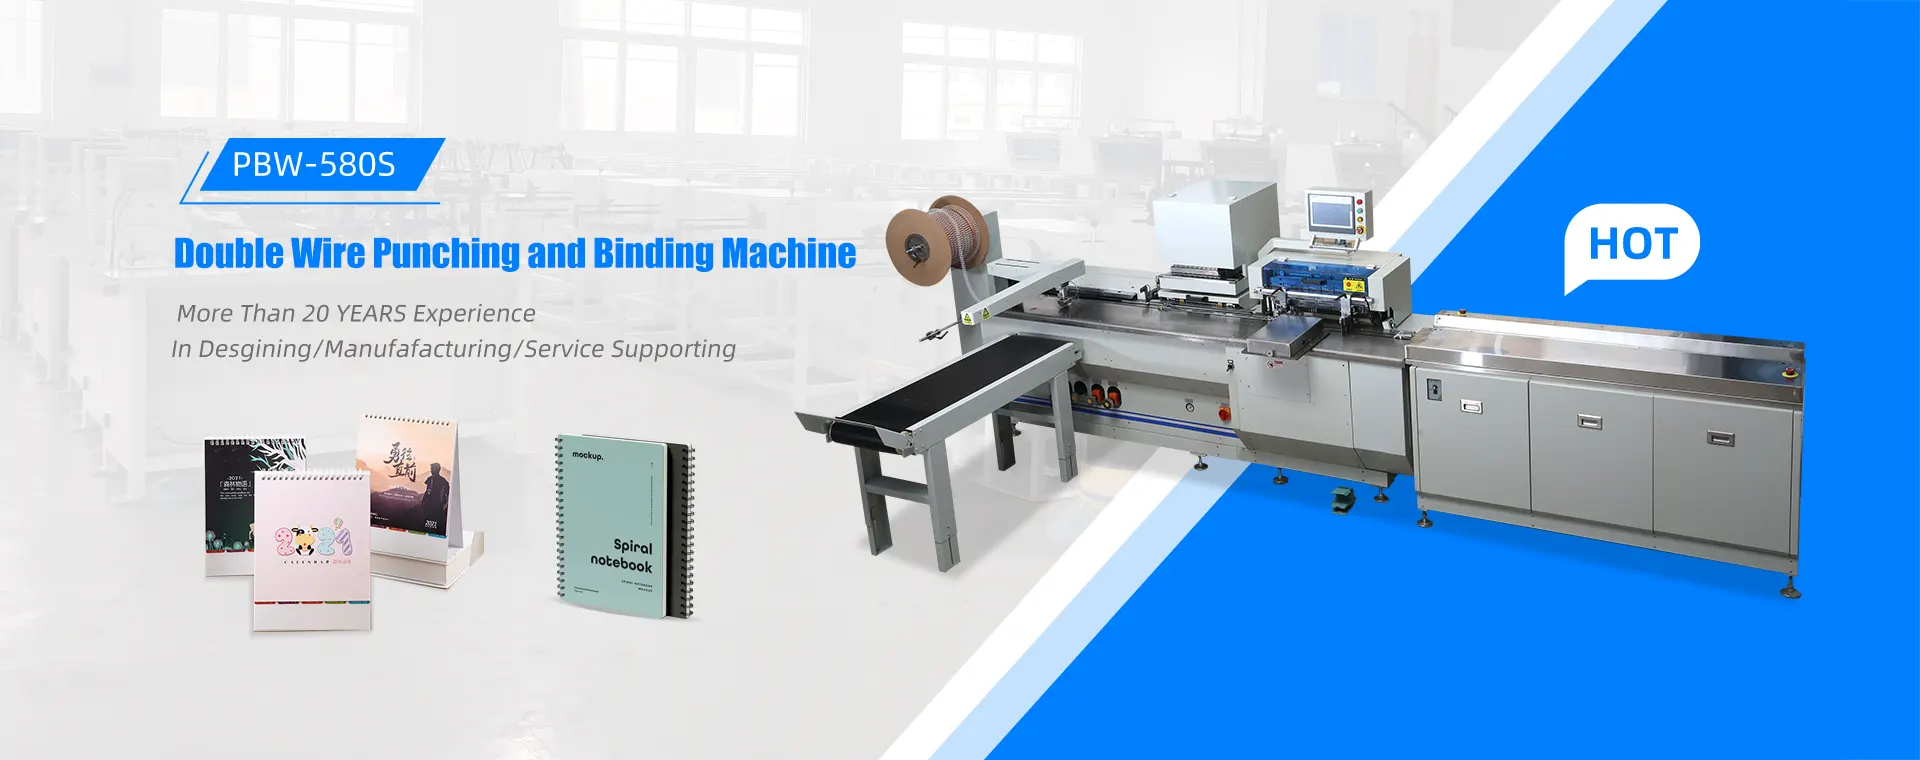 China Double Wire Punching and Binding Machine Manufacturers